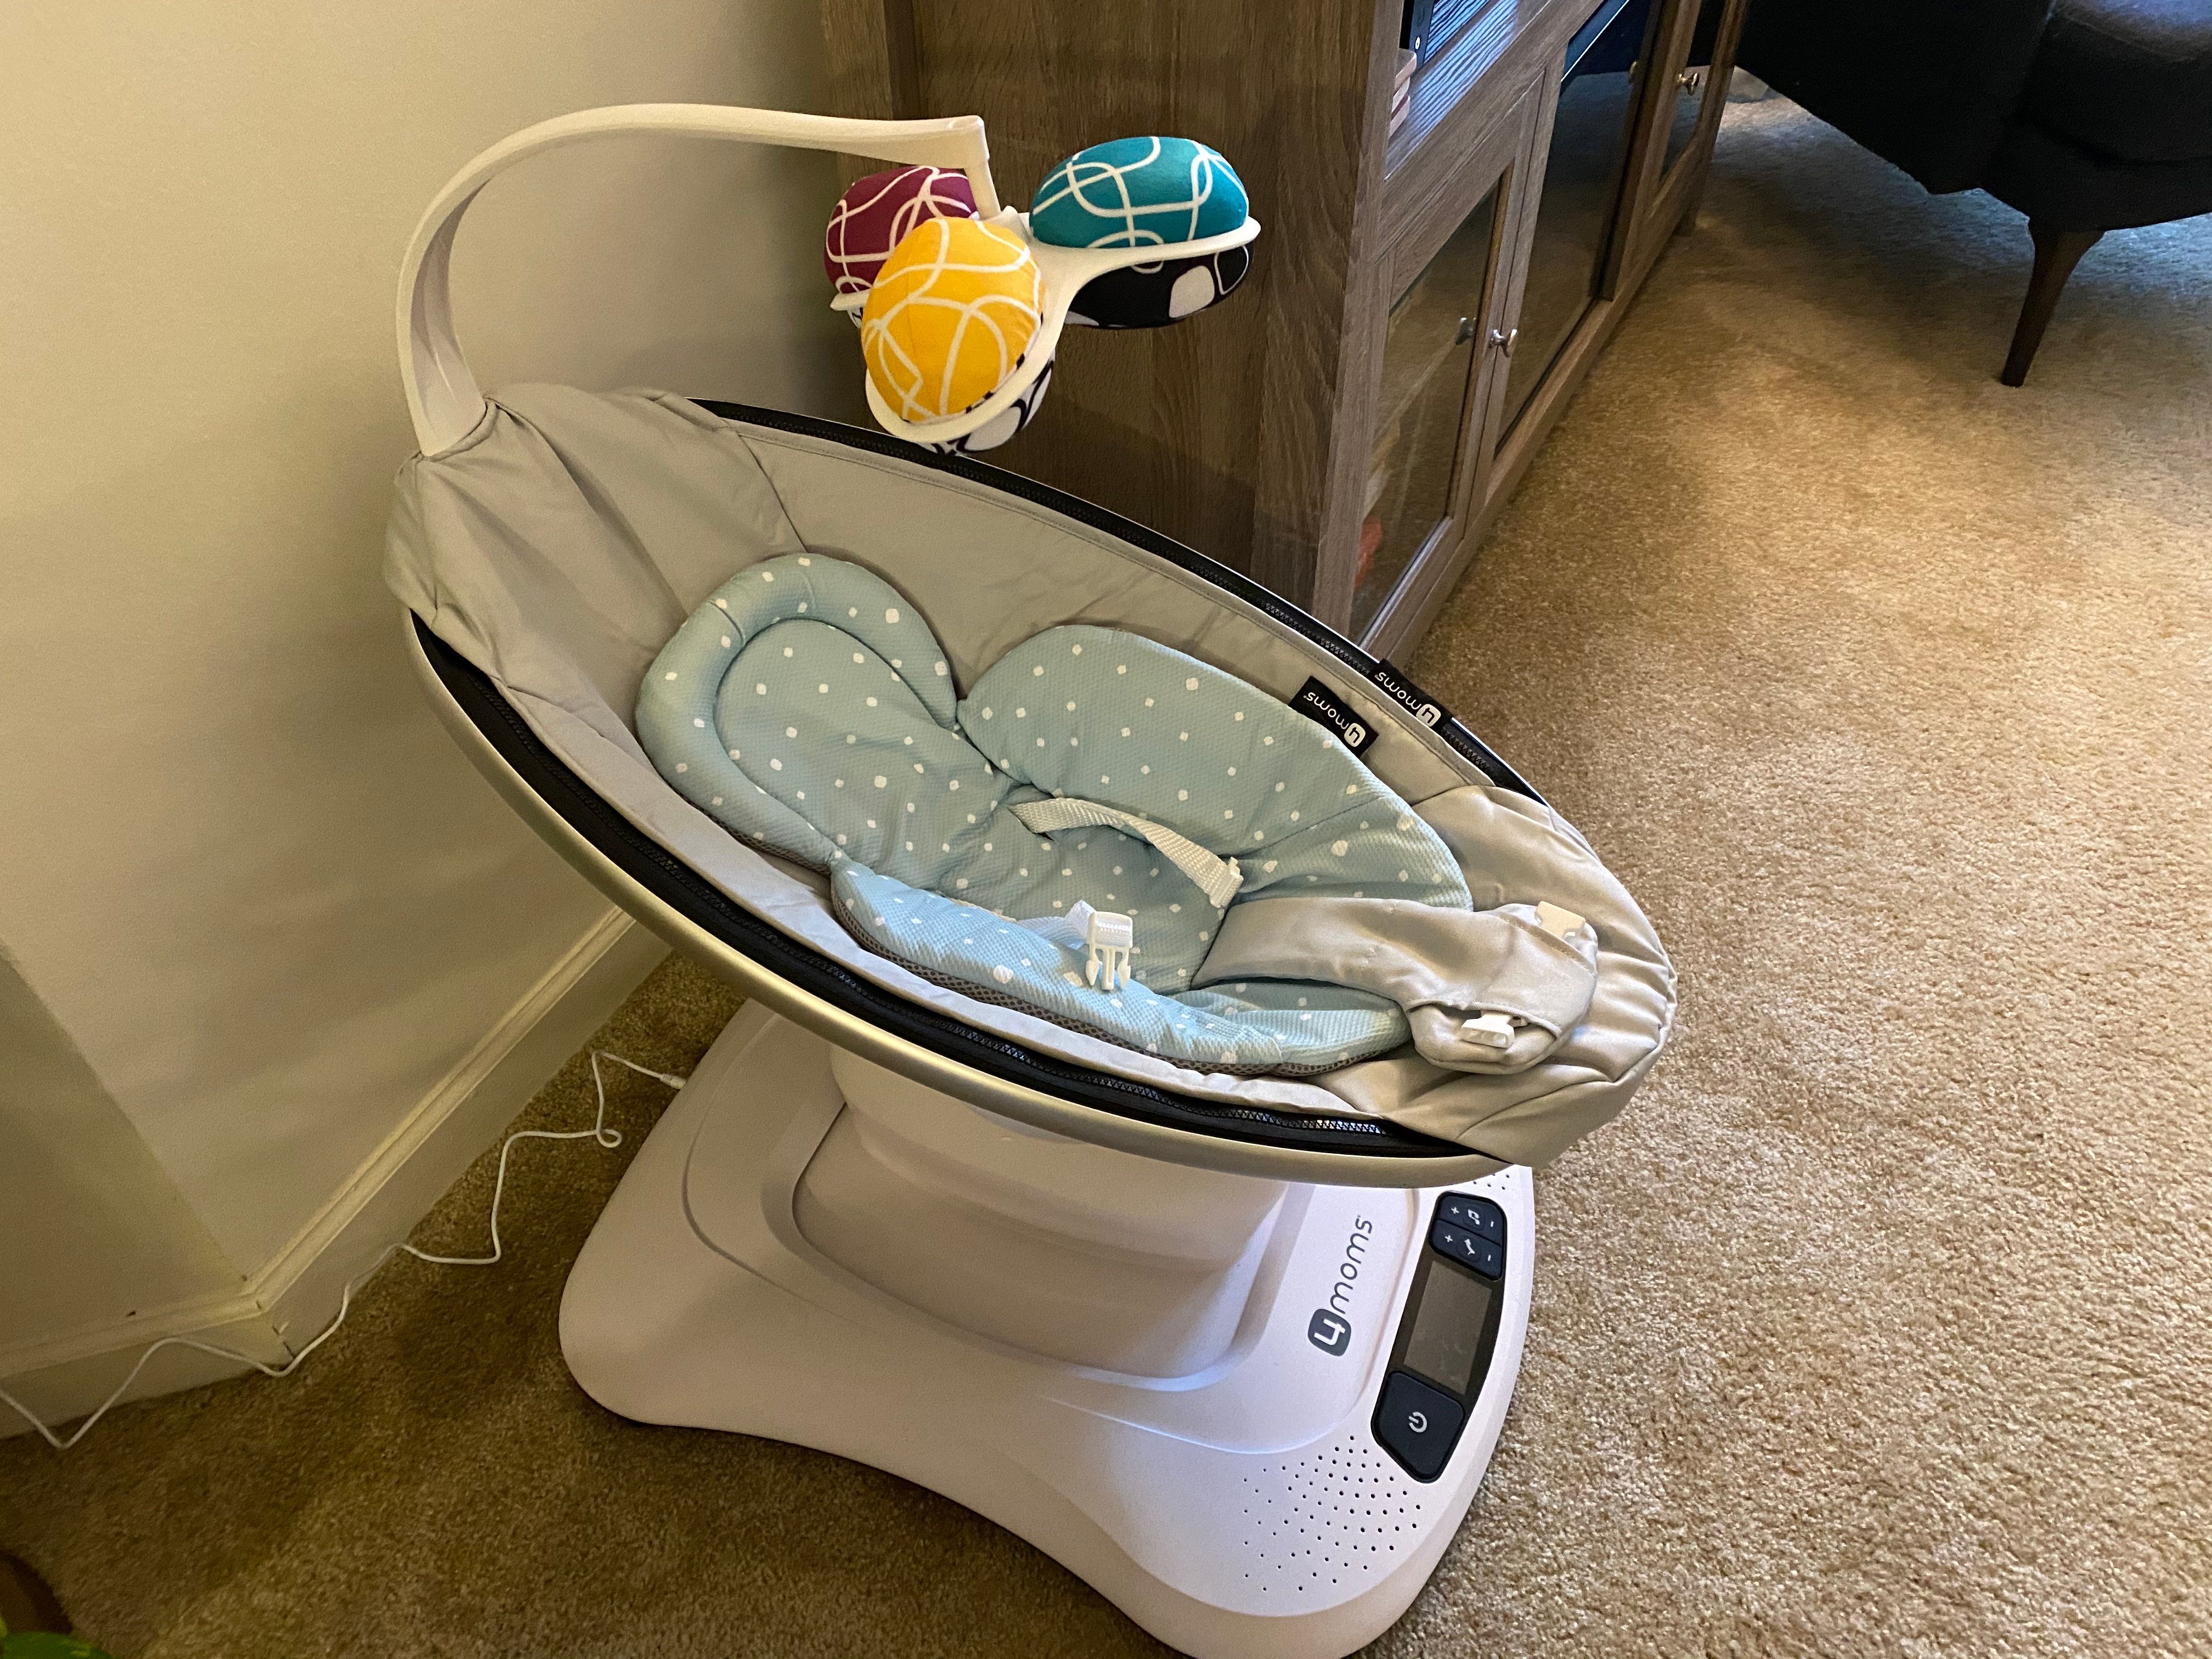 MamaRoo4 Smart Infant Seat Review: Great for newborns